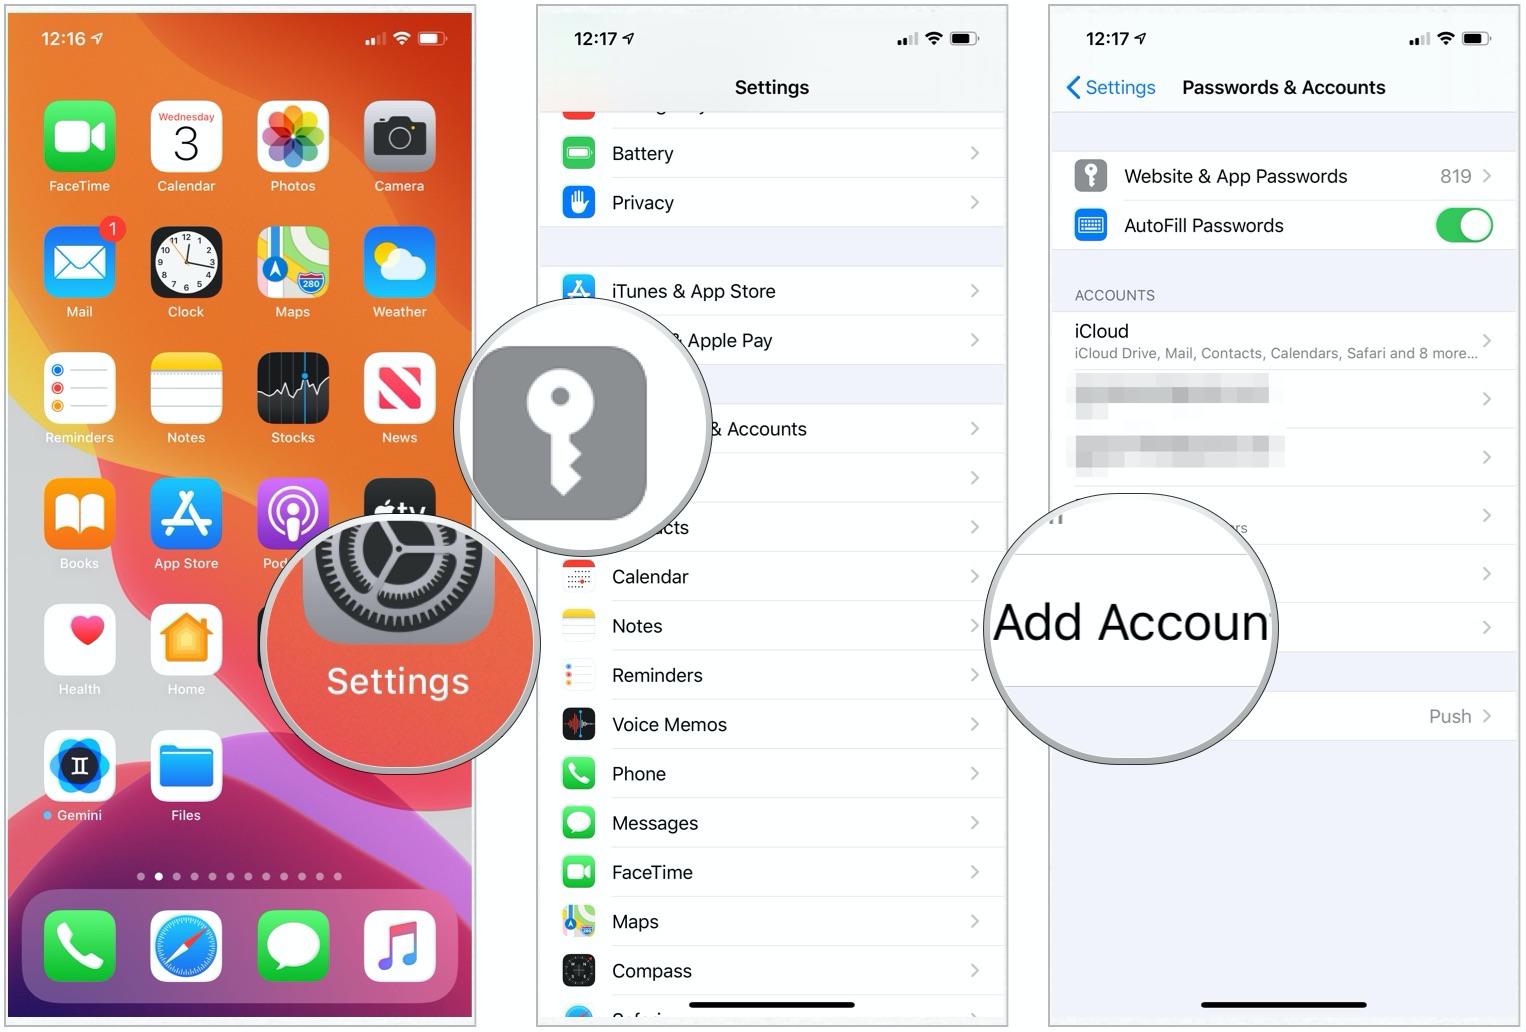 To add a new email account, choose the Settings app, tap Passwords & Accounts, then select Add Account and follow directions.